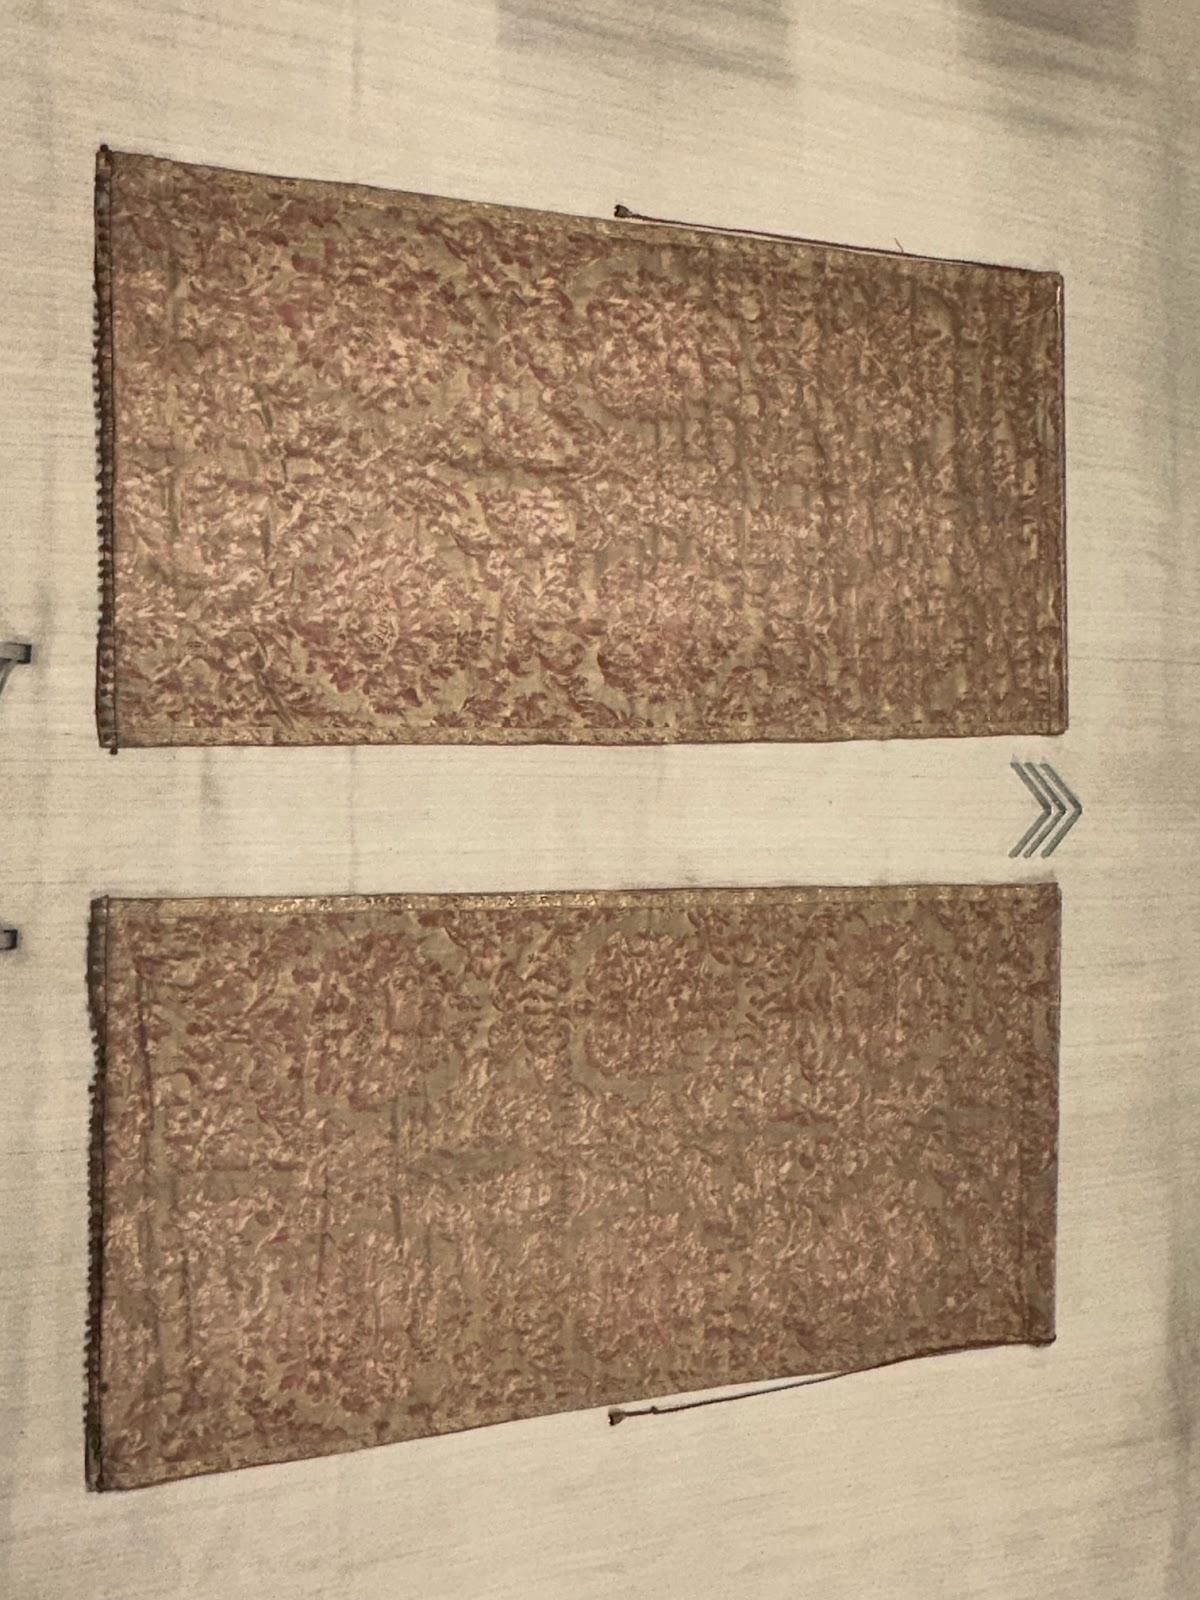 Pair of Fortuny Roman Shades (84″ x 42″) In Good Condition For Sale In Sag Harbor, NY